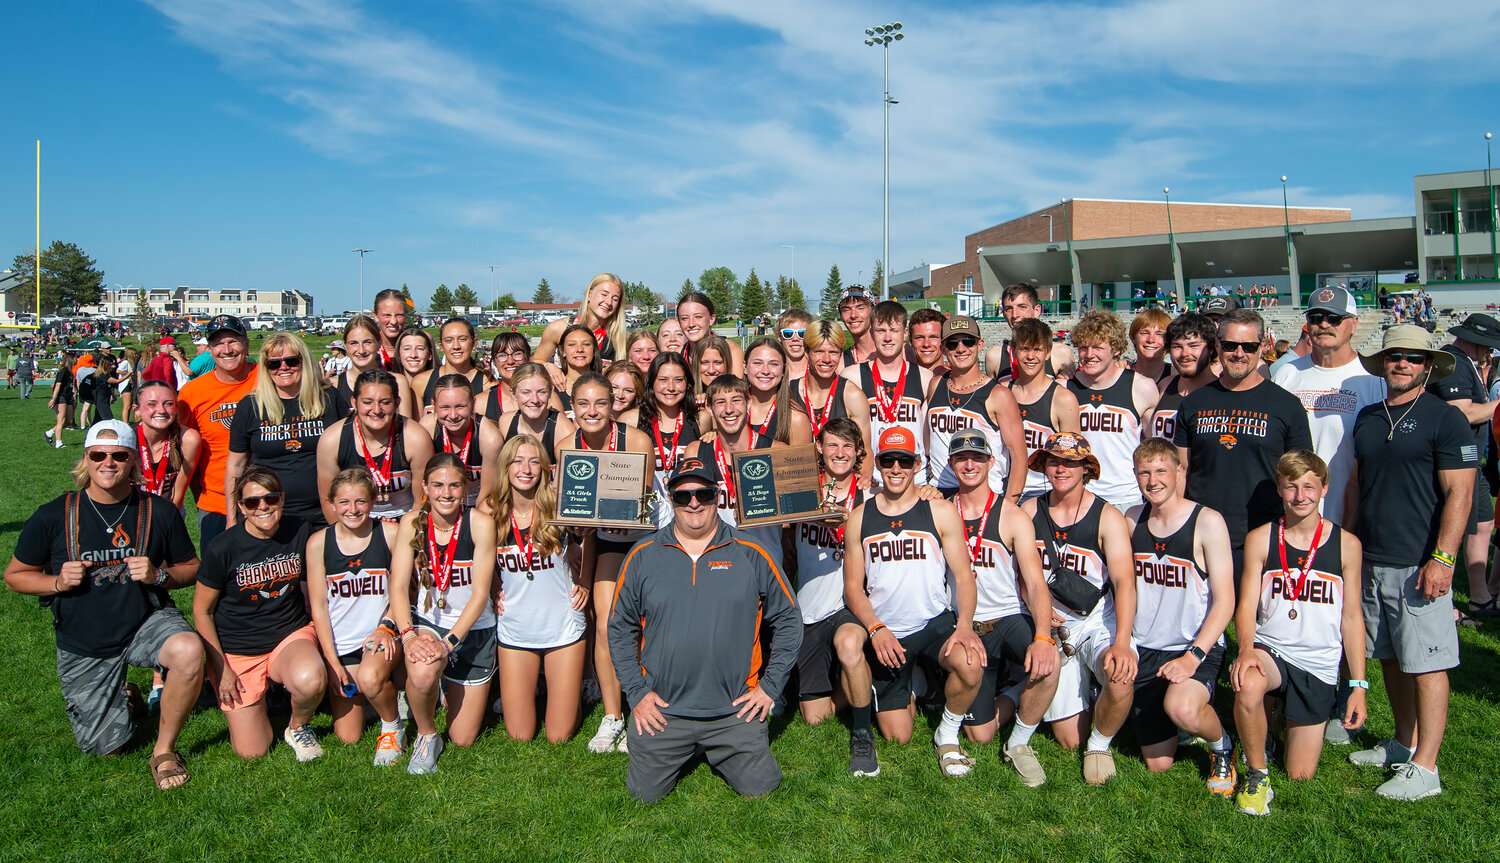 The Panthers gathered together to celebrate both winning 3A state track titles Saturday in Casper. Its the third title in a row for the girls.